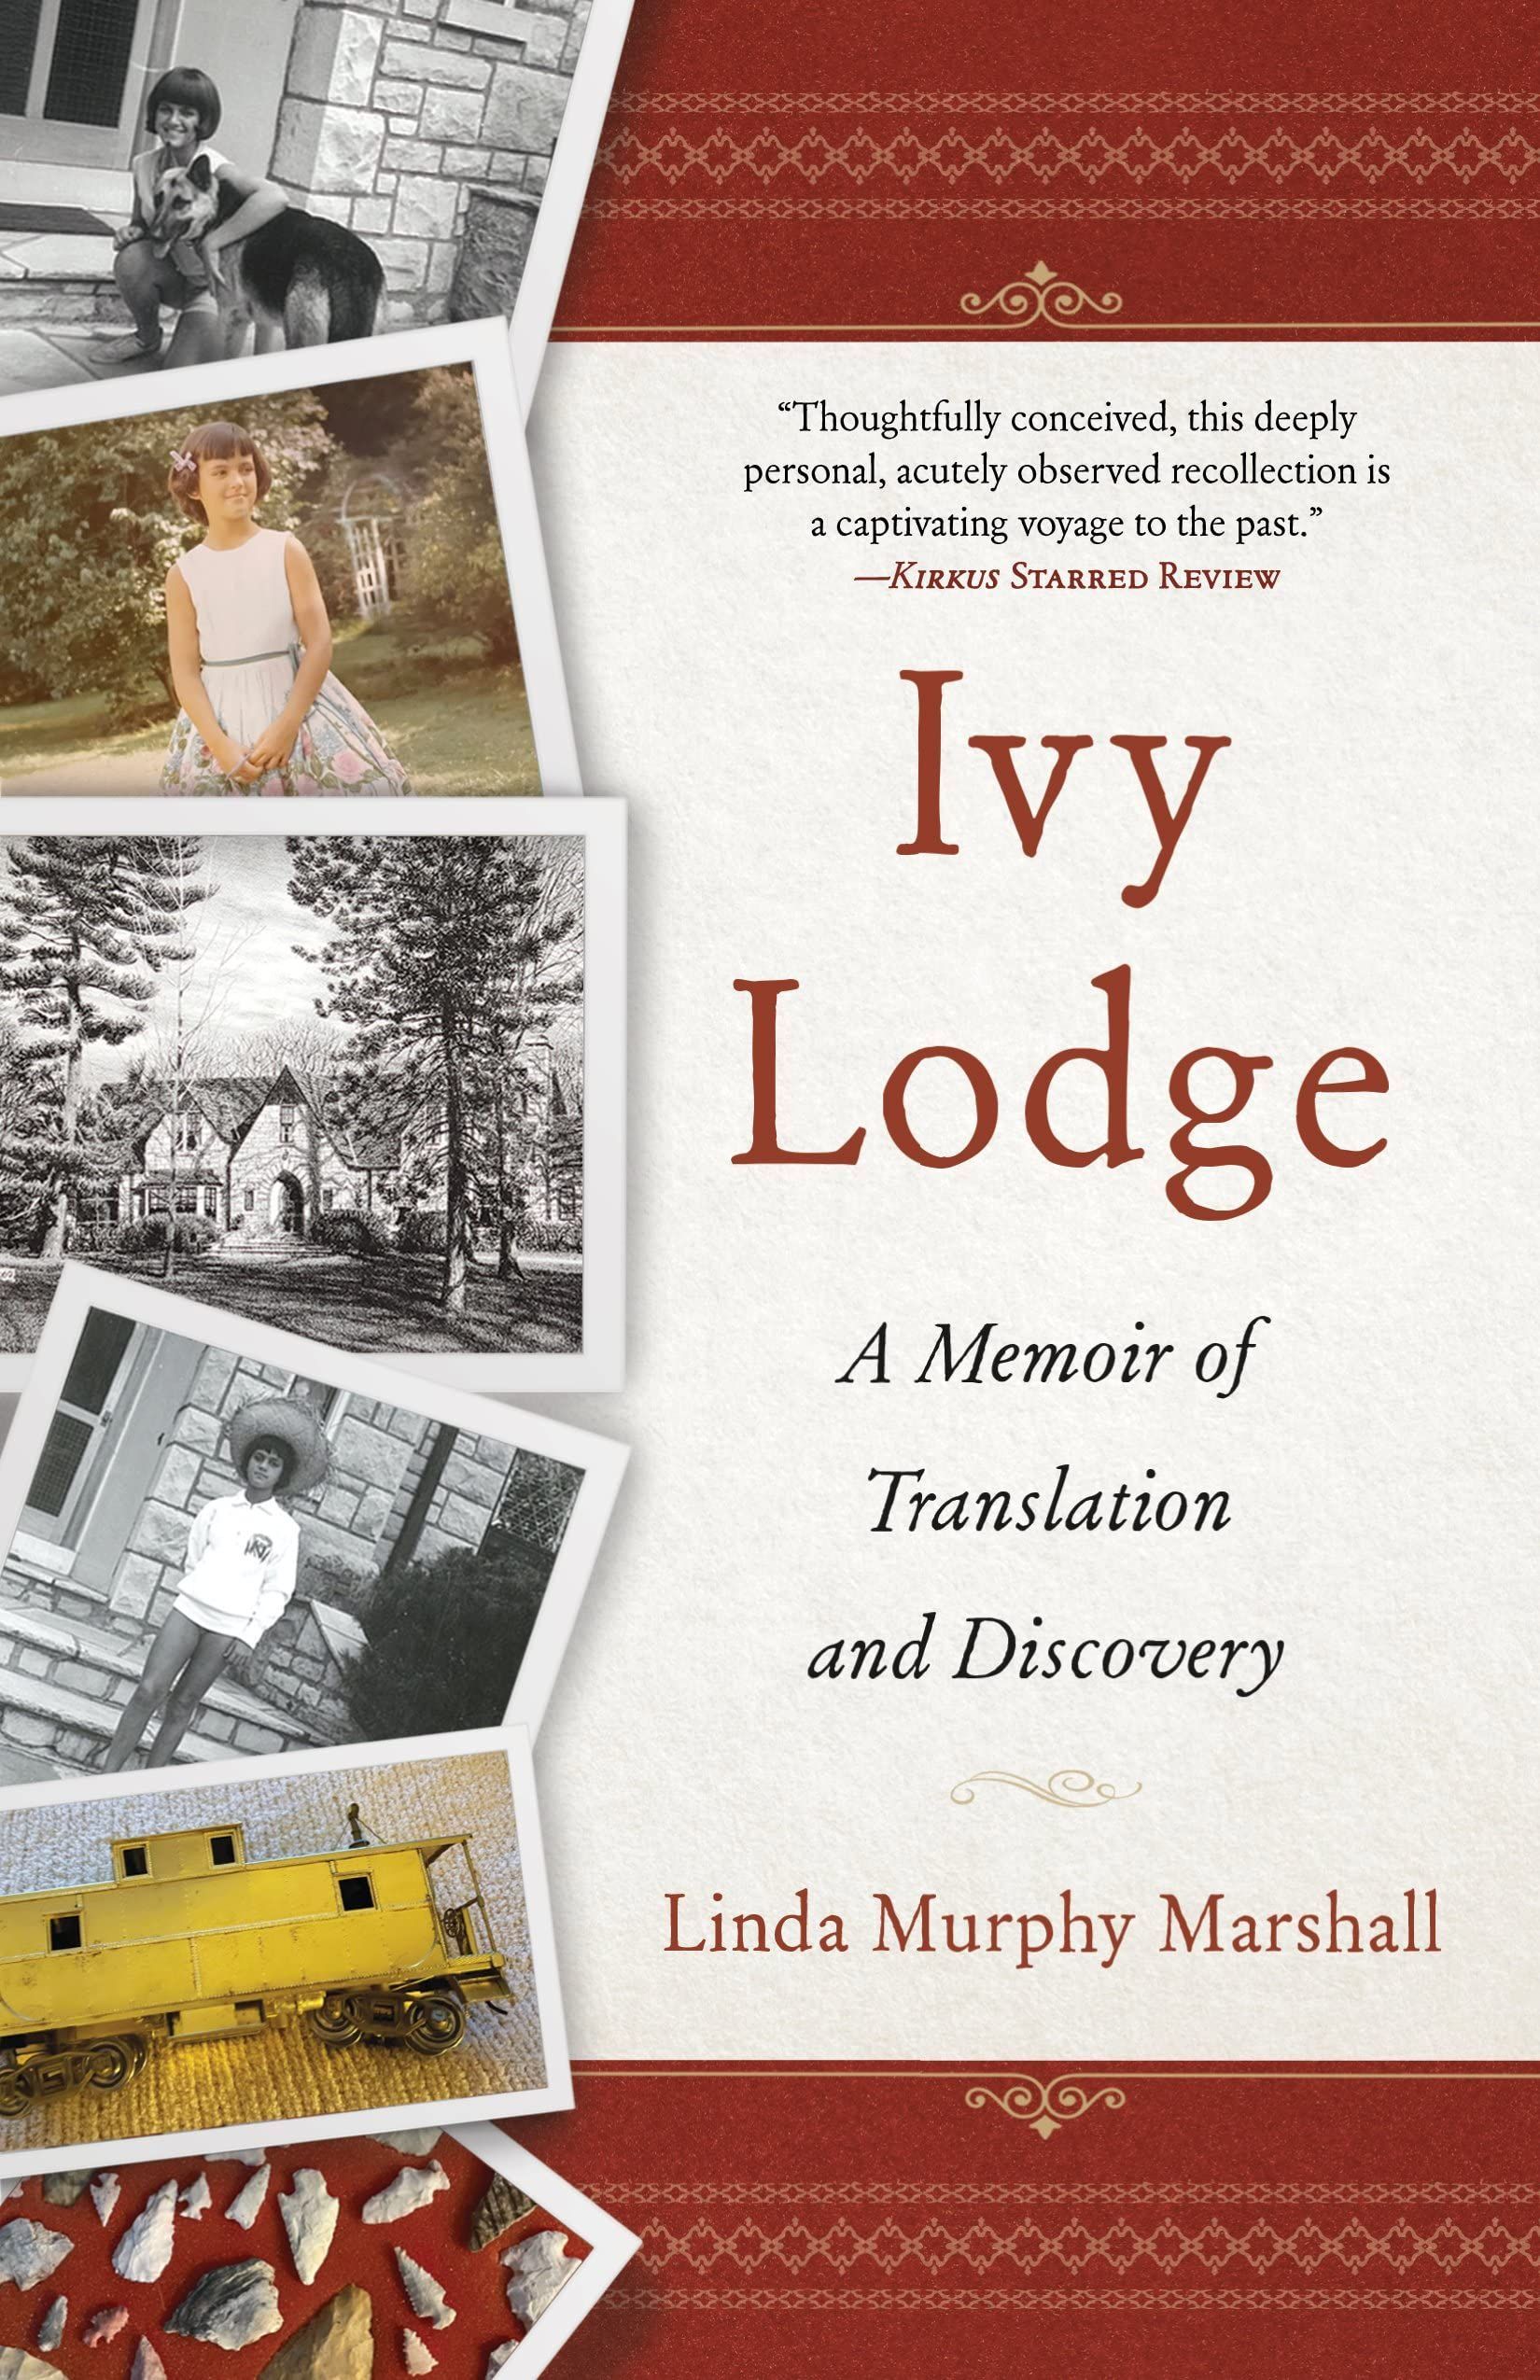 When Family Is a Foreign Language: On Linda Murphy Marshall’s “Ivy Lodge”